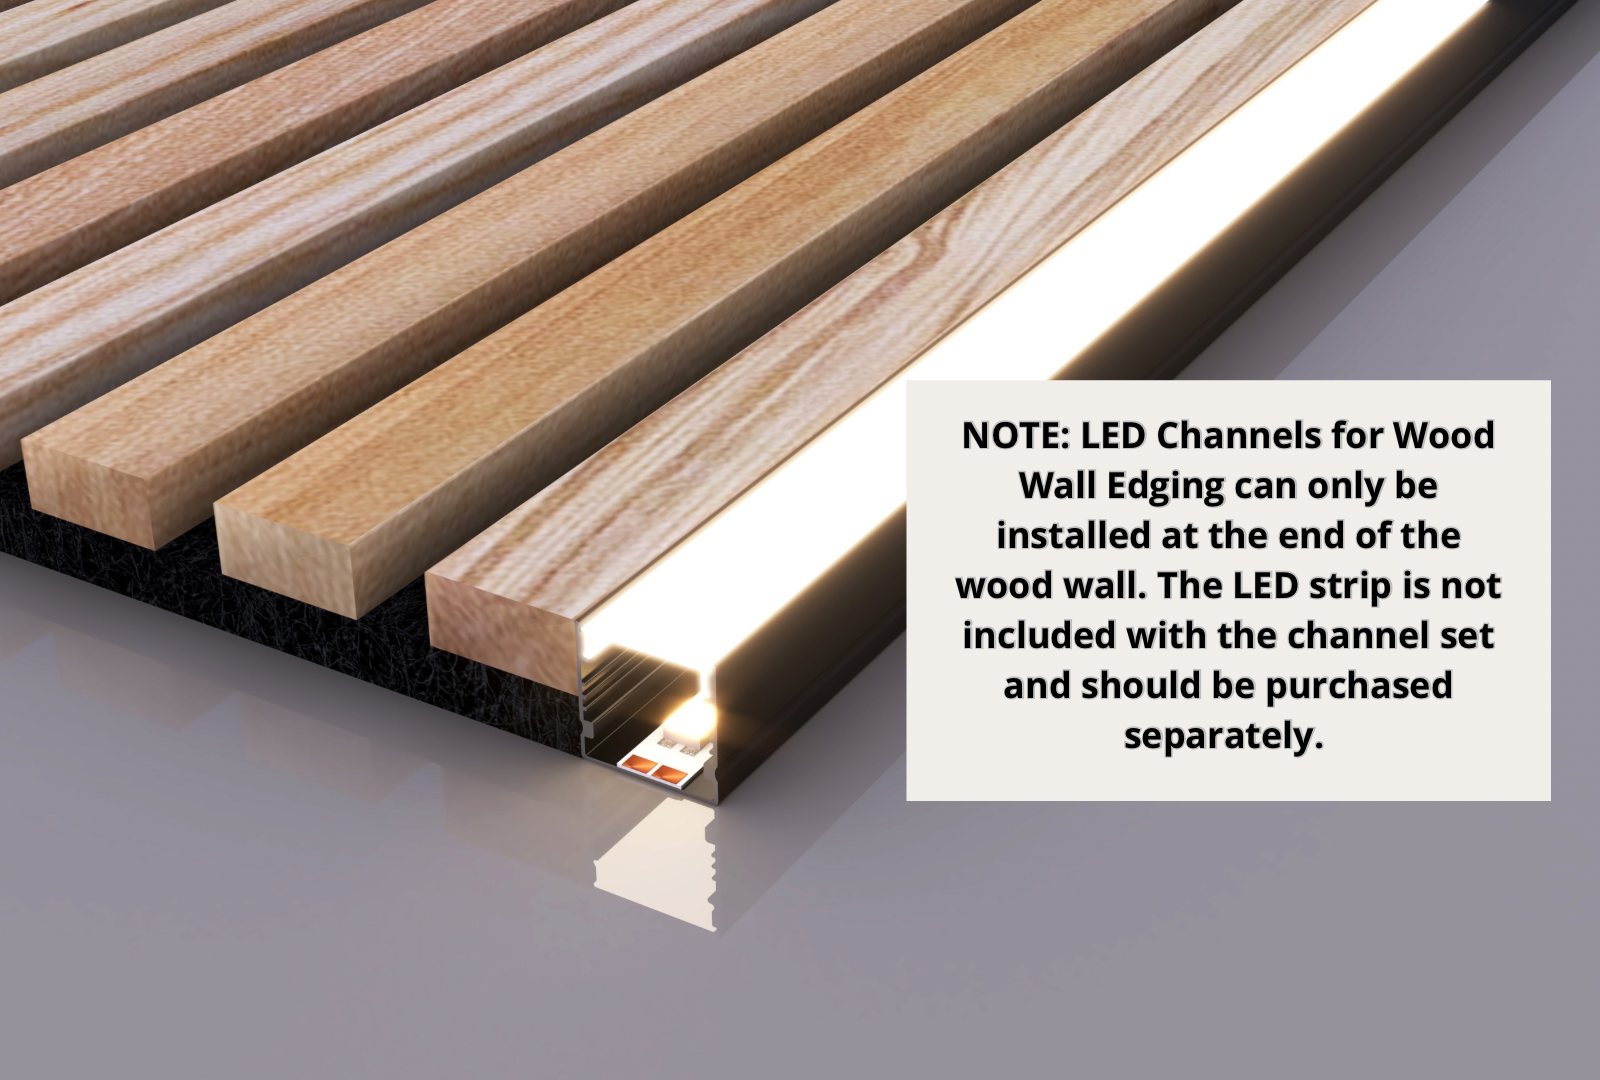 LED Channel for Wood Wall Edging